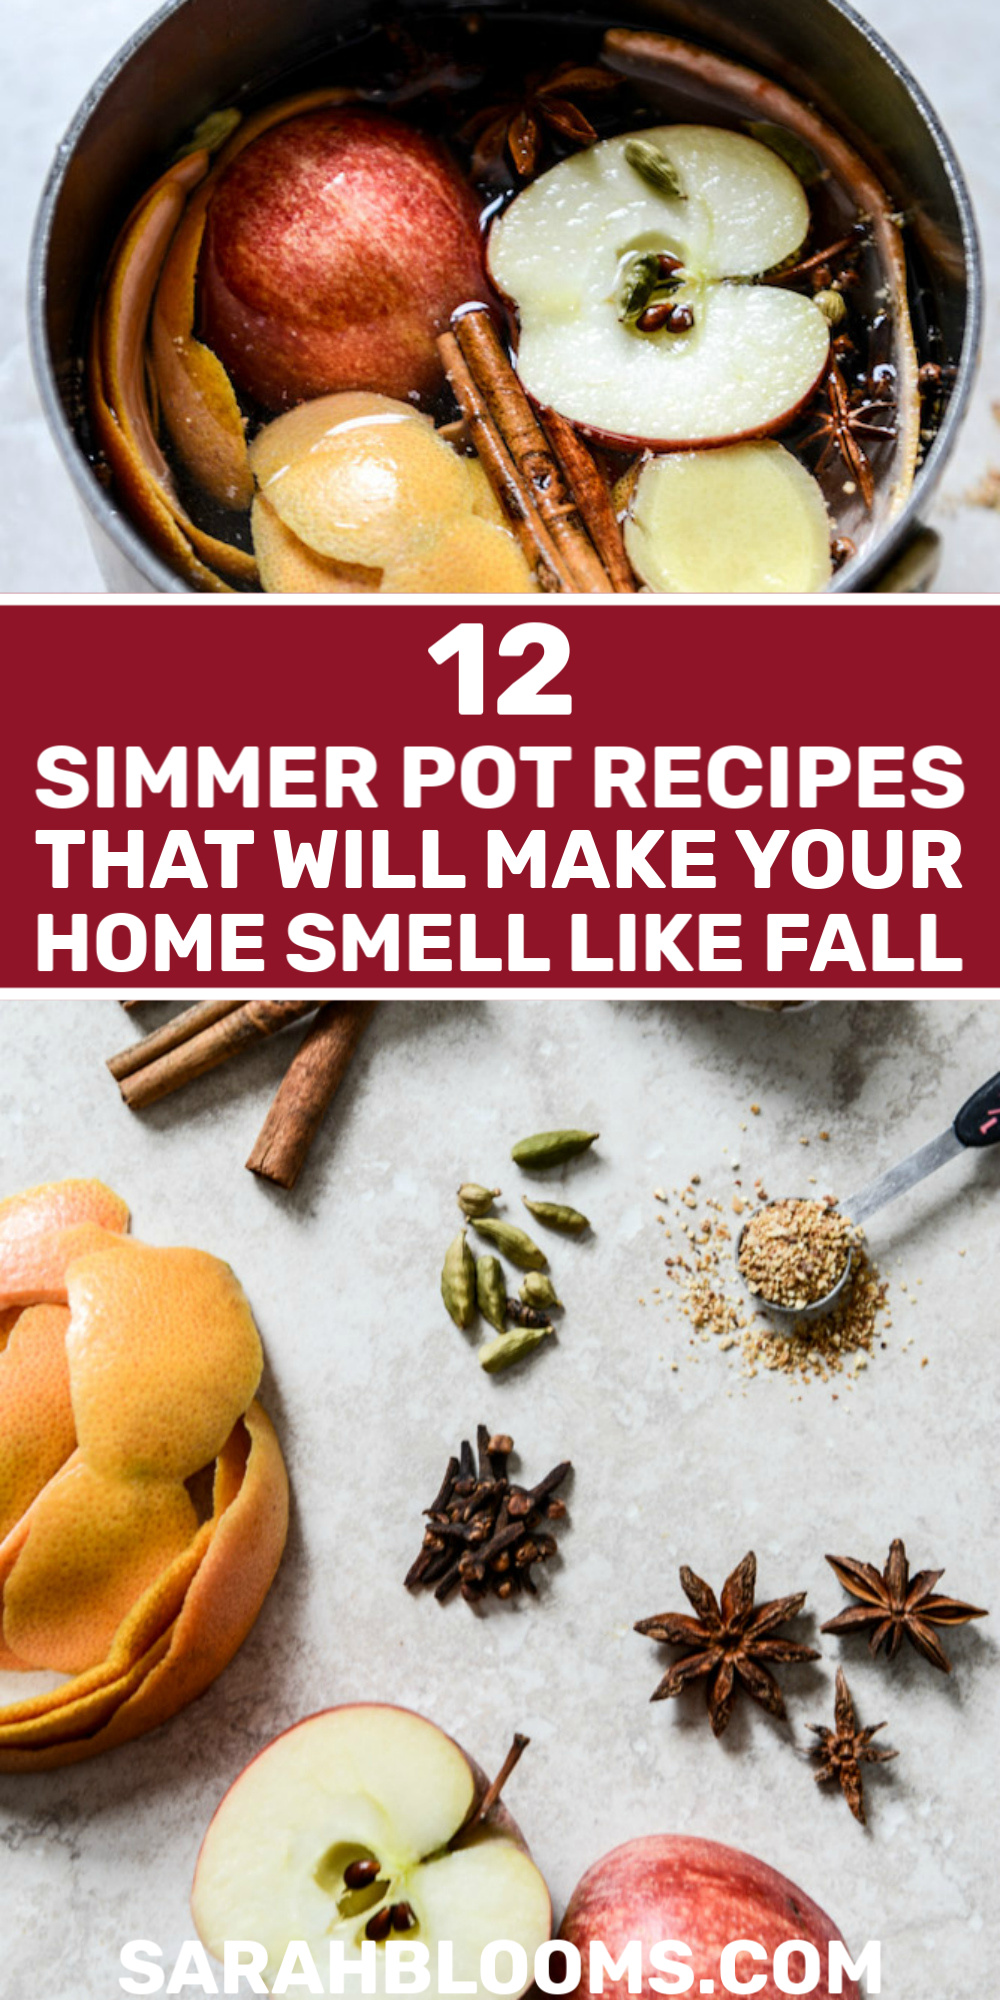 12 Fall Inspired Simmer Pot Recipes That Will Make Your Home Smell Like Autumn #simmerpots #simmerpotrecipes #naturalcleaning #naturalscents #naturalhomescents #homehacks #diycleaning #cleaninghacks #falltips